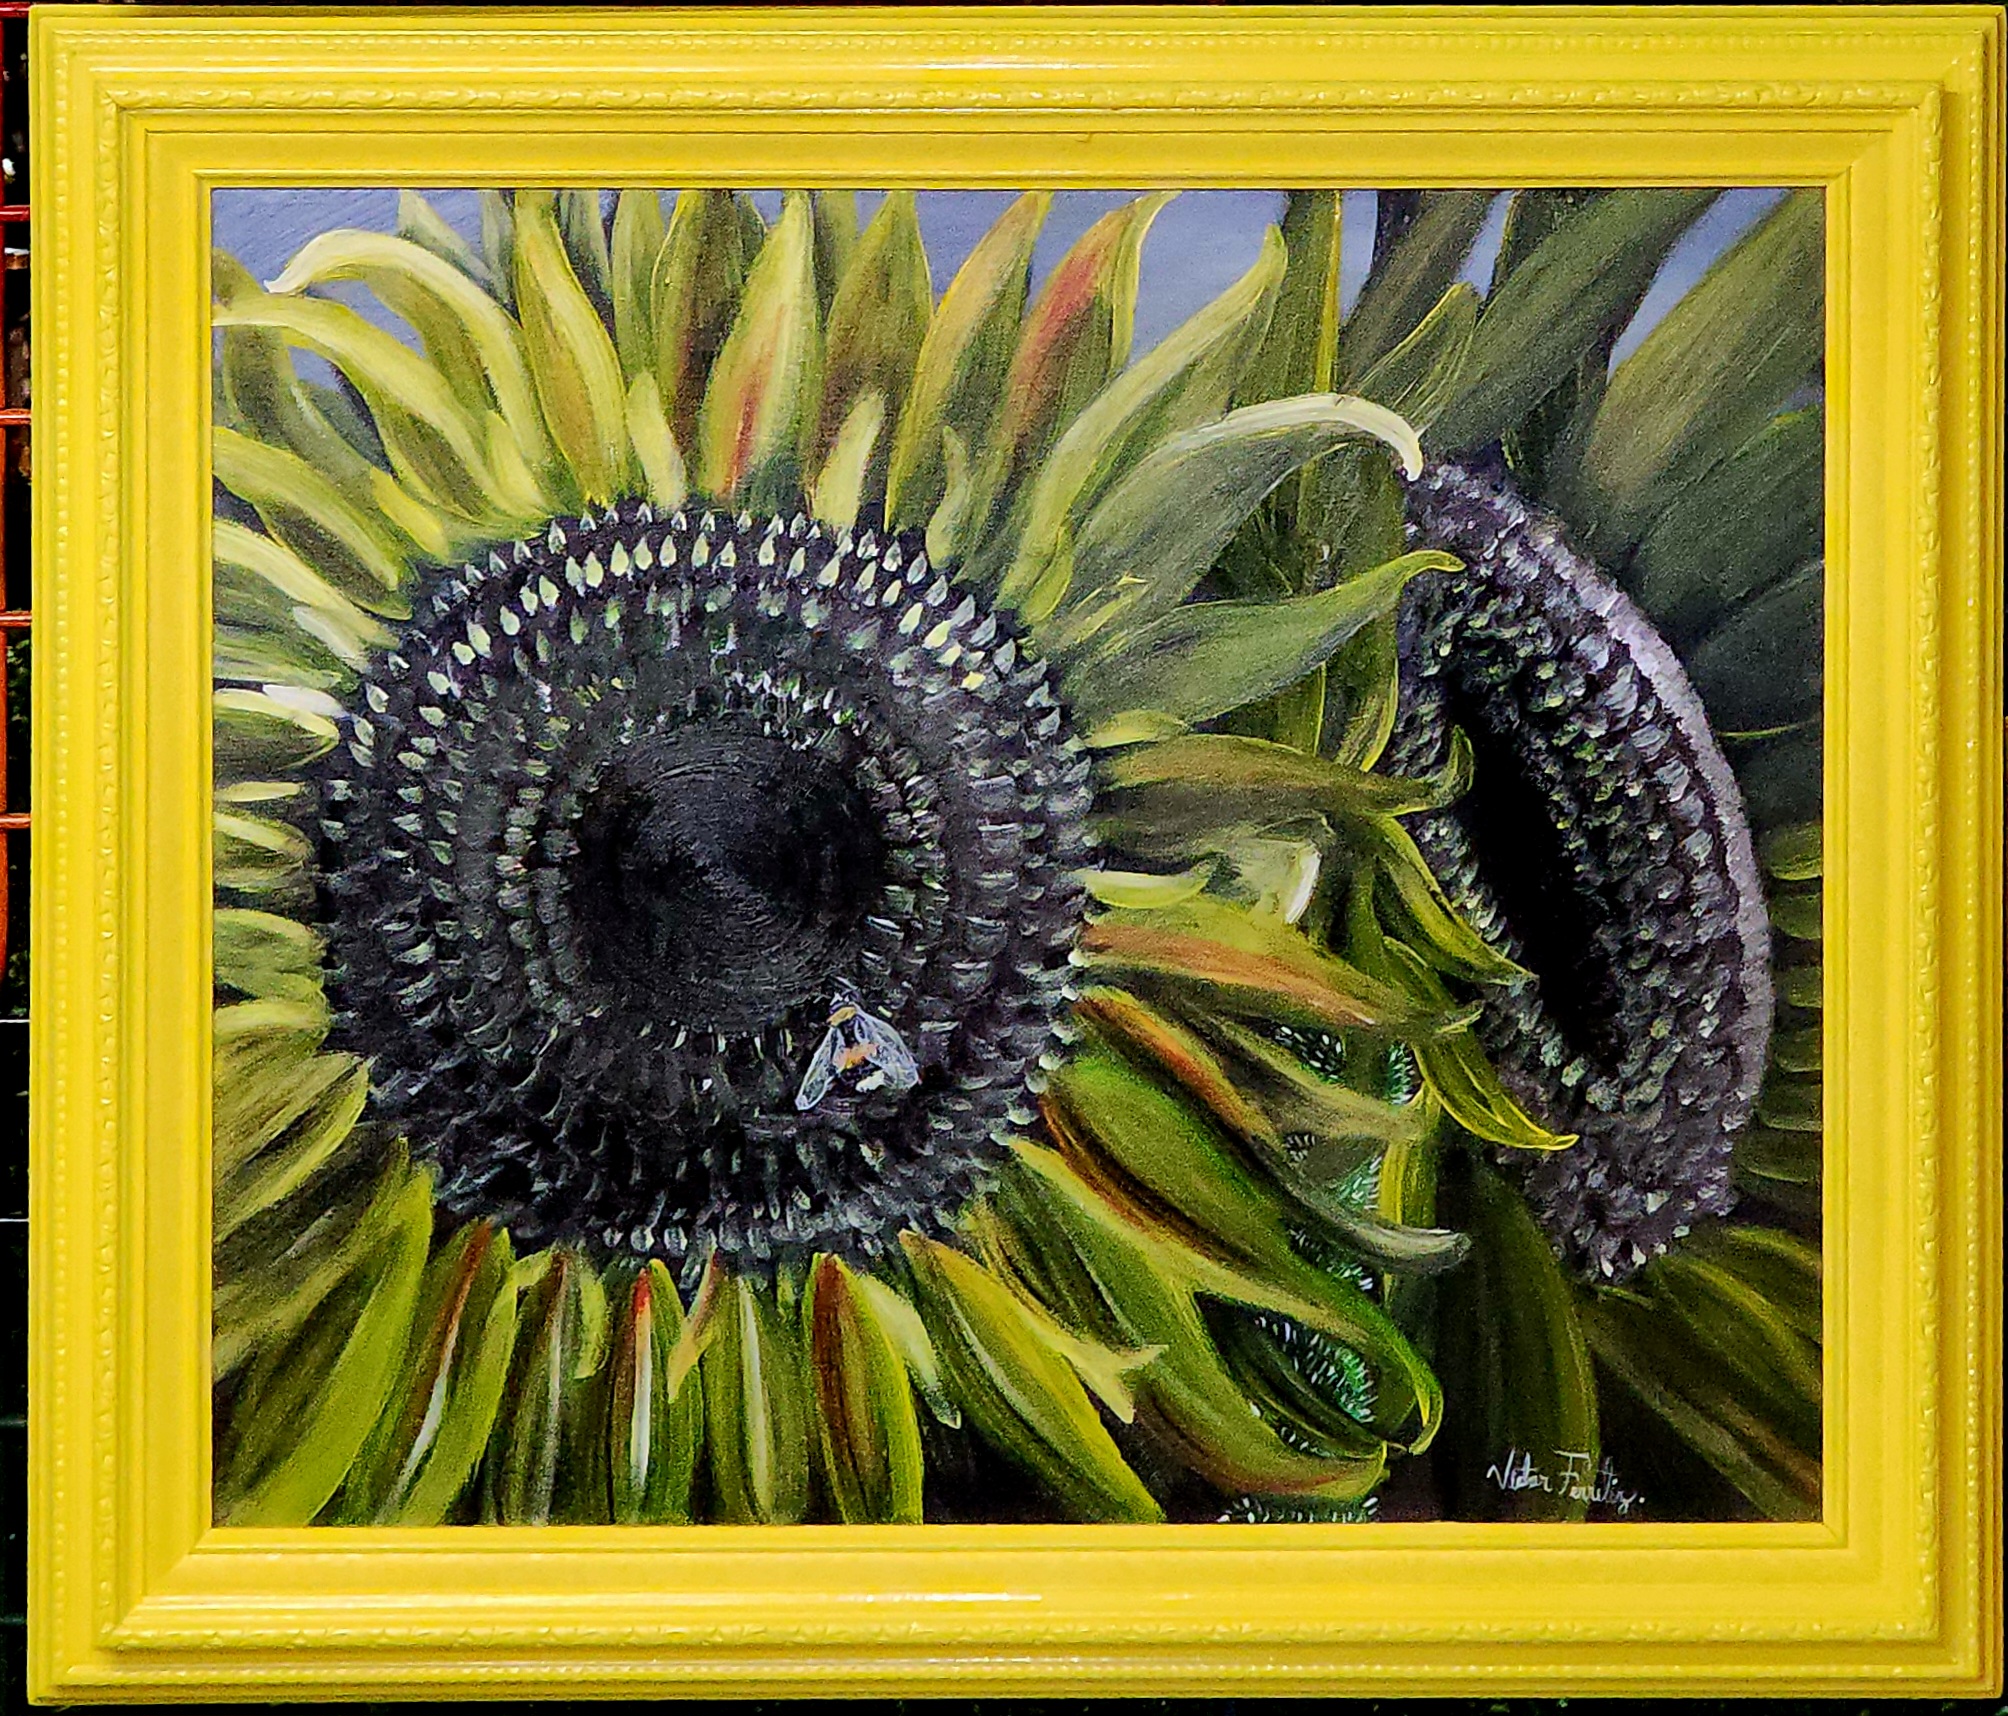 This is a depiction of abstract sunflowers on acrylic paint on canvas. The painting is already framed and ready to hang on your beautiful and warming home.